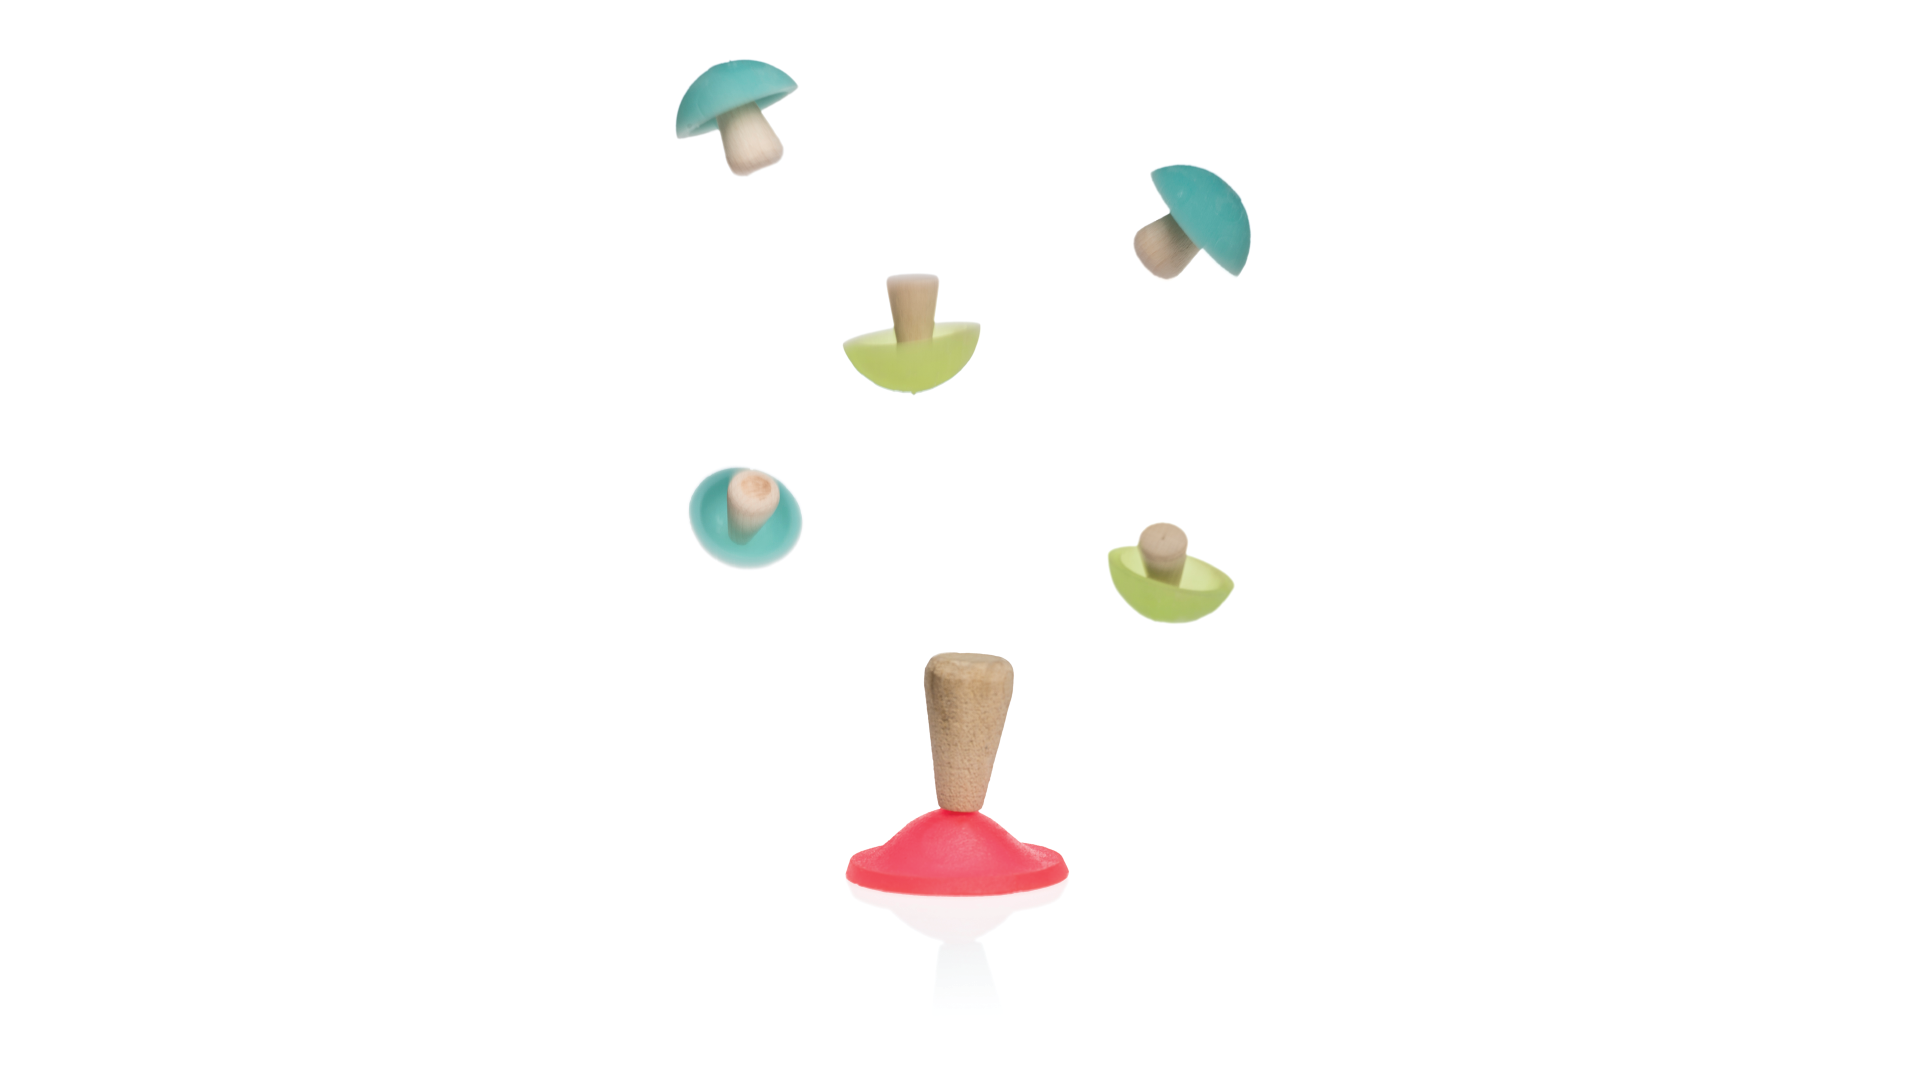 Mushroom toy inverted with 5 other toys floating on the scene.